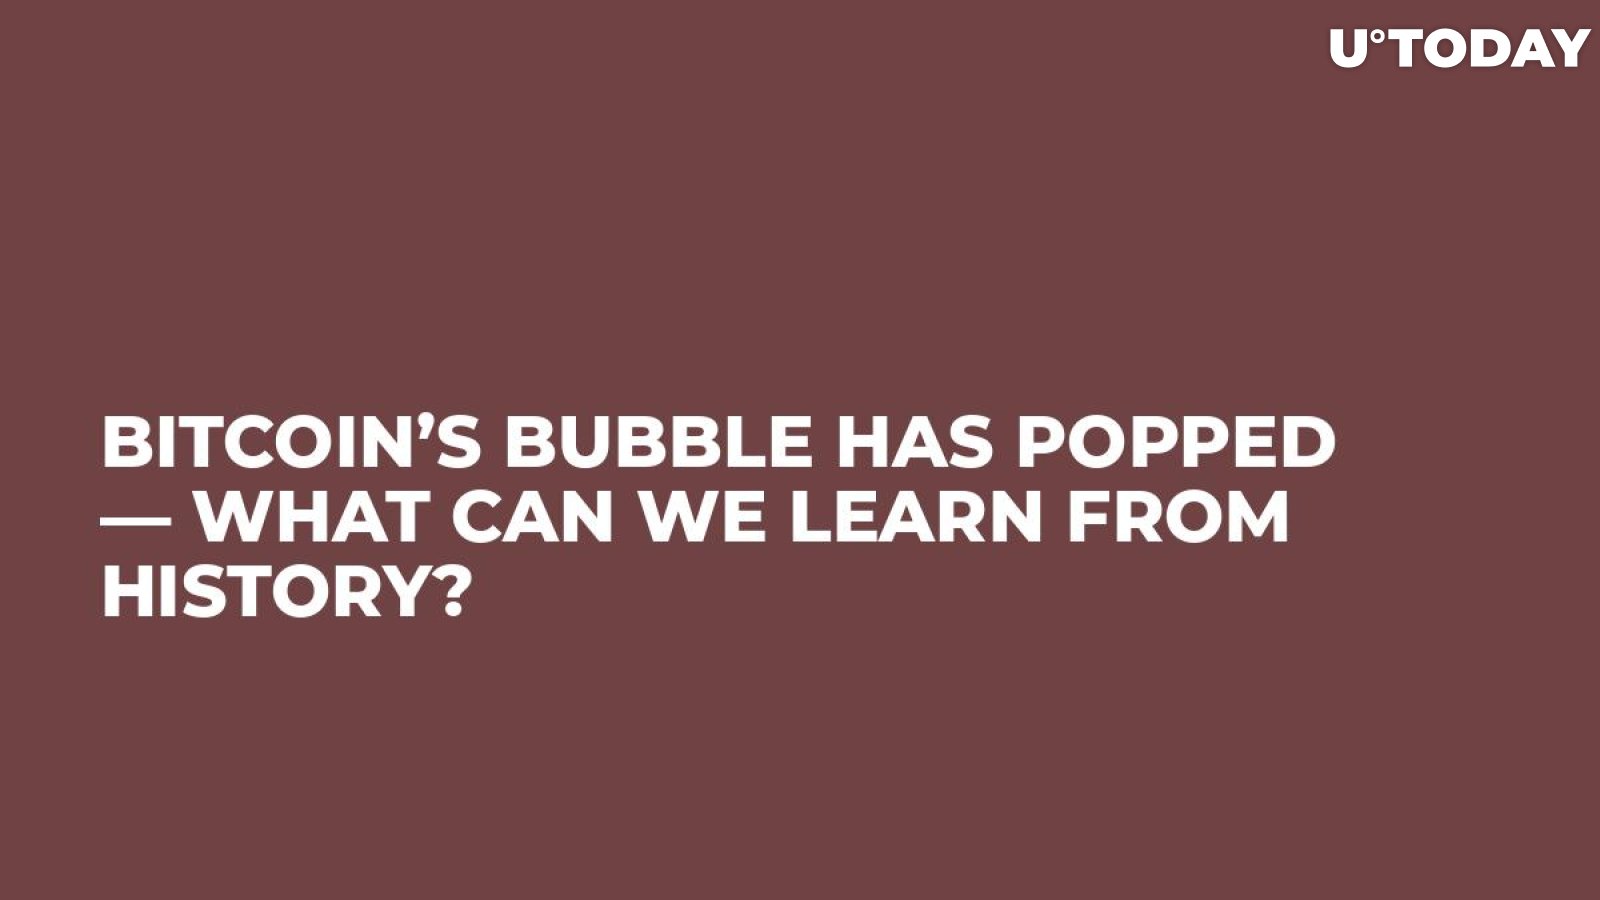 Bitcoin’s Bubble Has Popped — What Can We Learn From History?